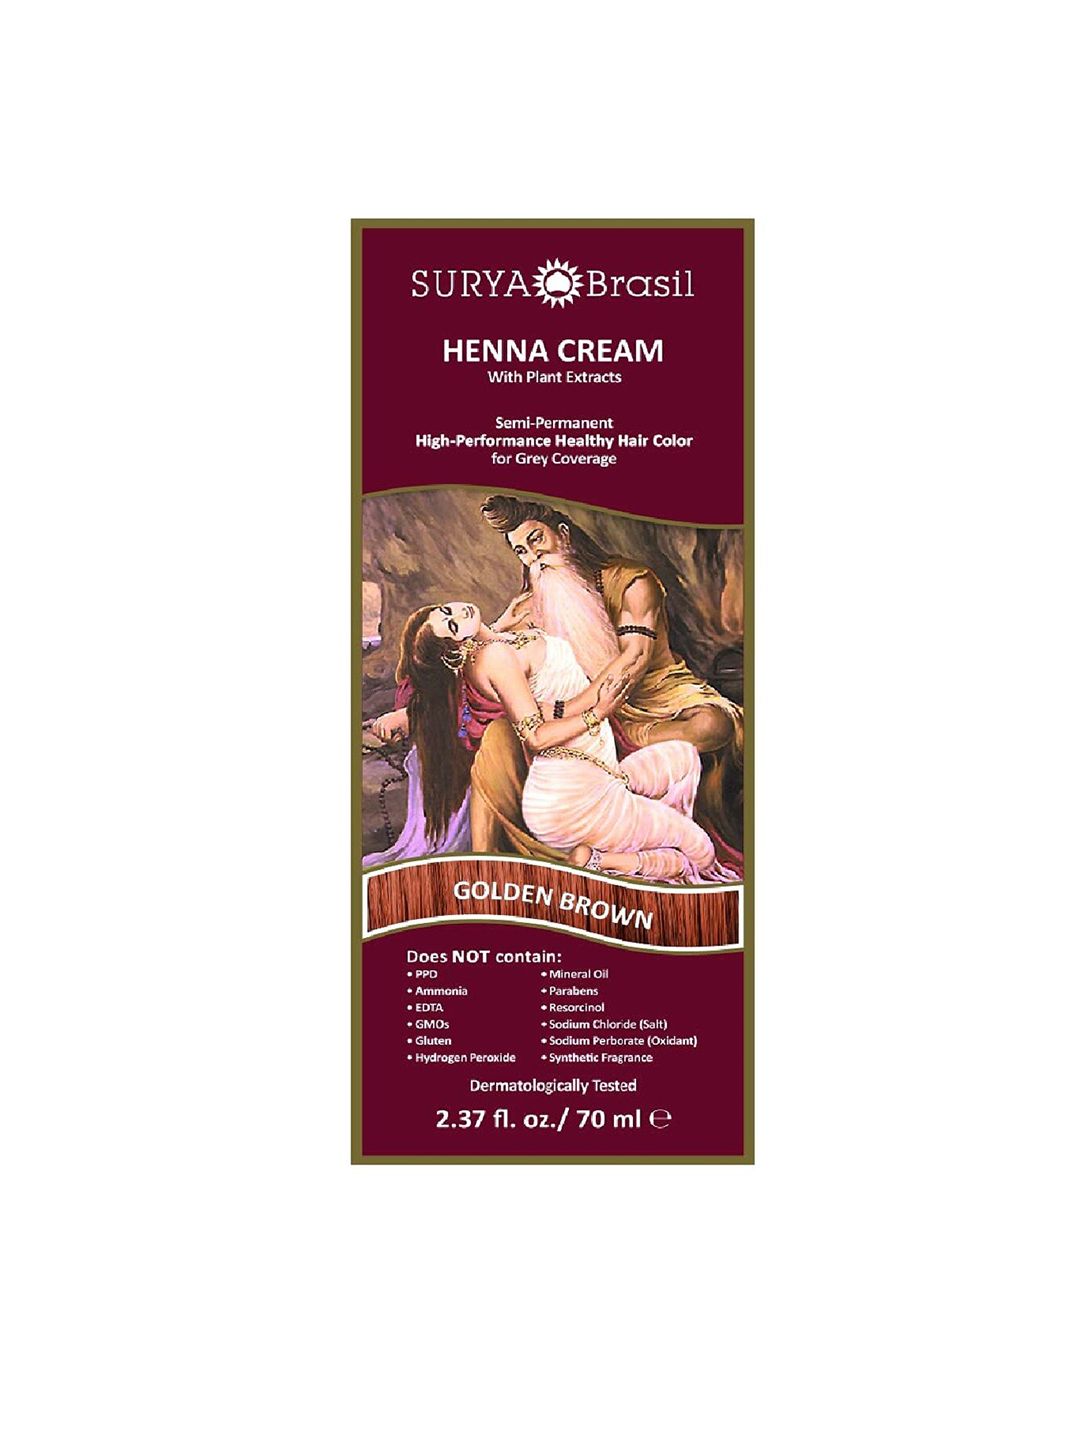 SURYA Brasil Henna Cream Semi-Permanent Hair Color with Plant Extracts 70ml - Golden Brown Price in India